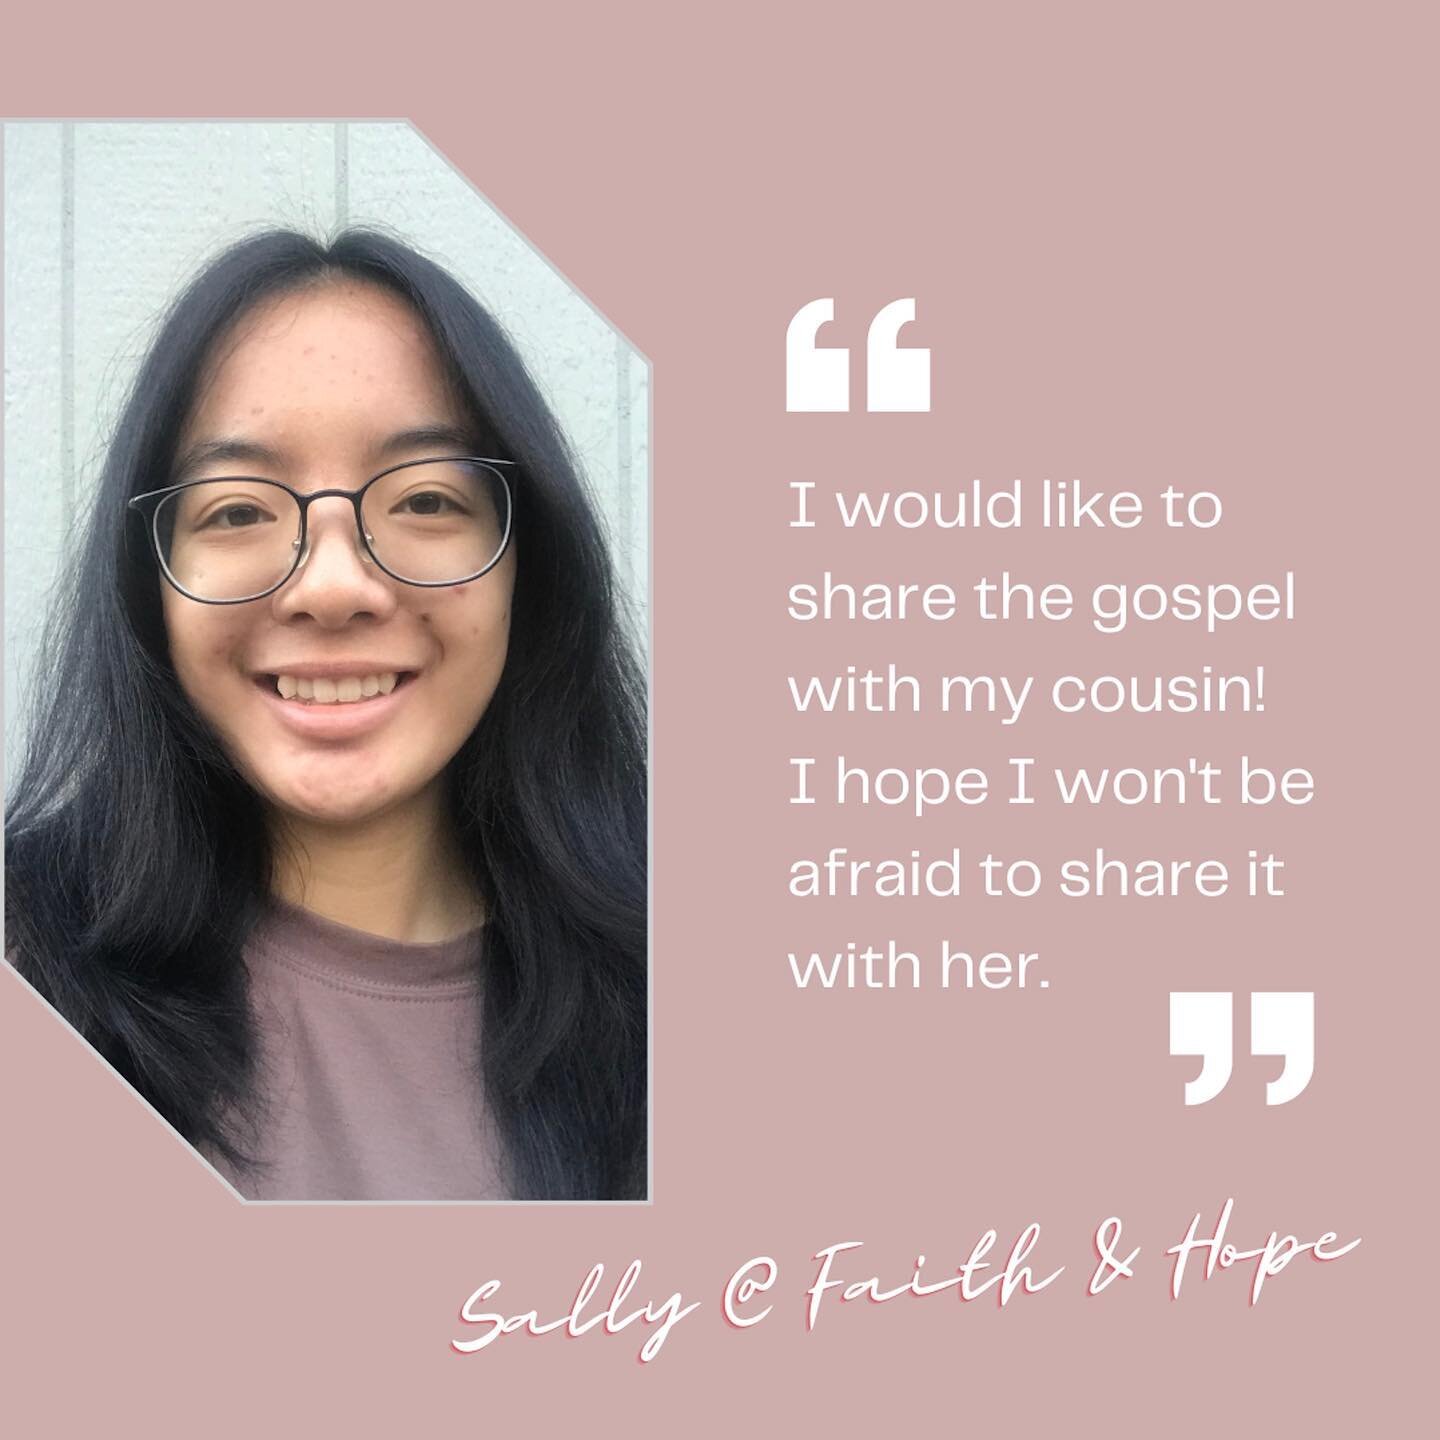 We wanted to feature some of our students with that Dare2Share spirit ❤️🔥 here&rsquo;s Sally from Faith &amp; Hope! We&rsquo;re thankful for her efforts and heart for her family. 🙏

Come join Dare2Share to hear from others that want to share the go